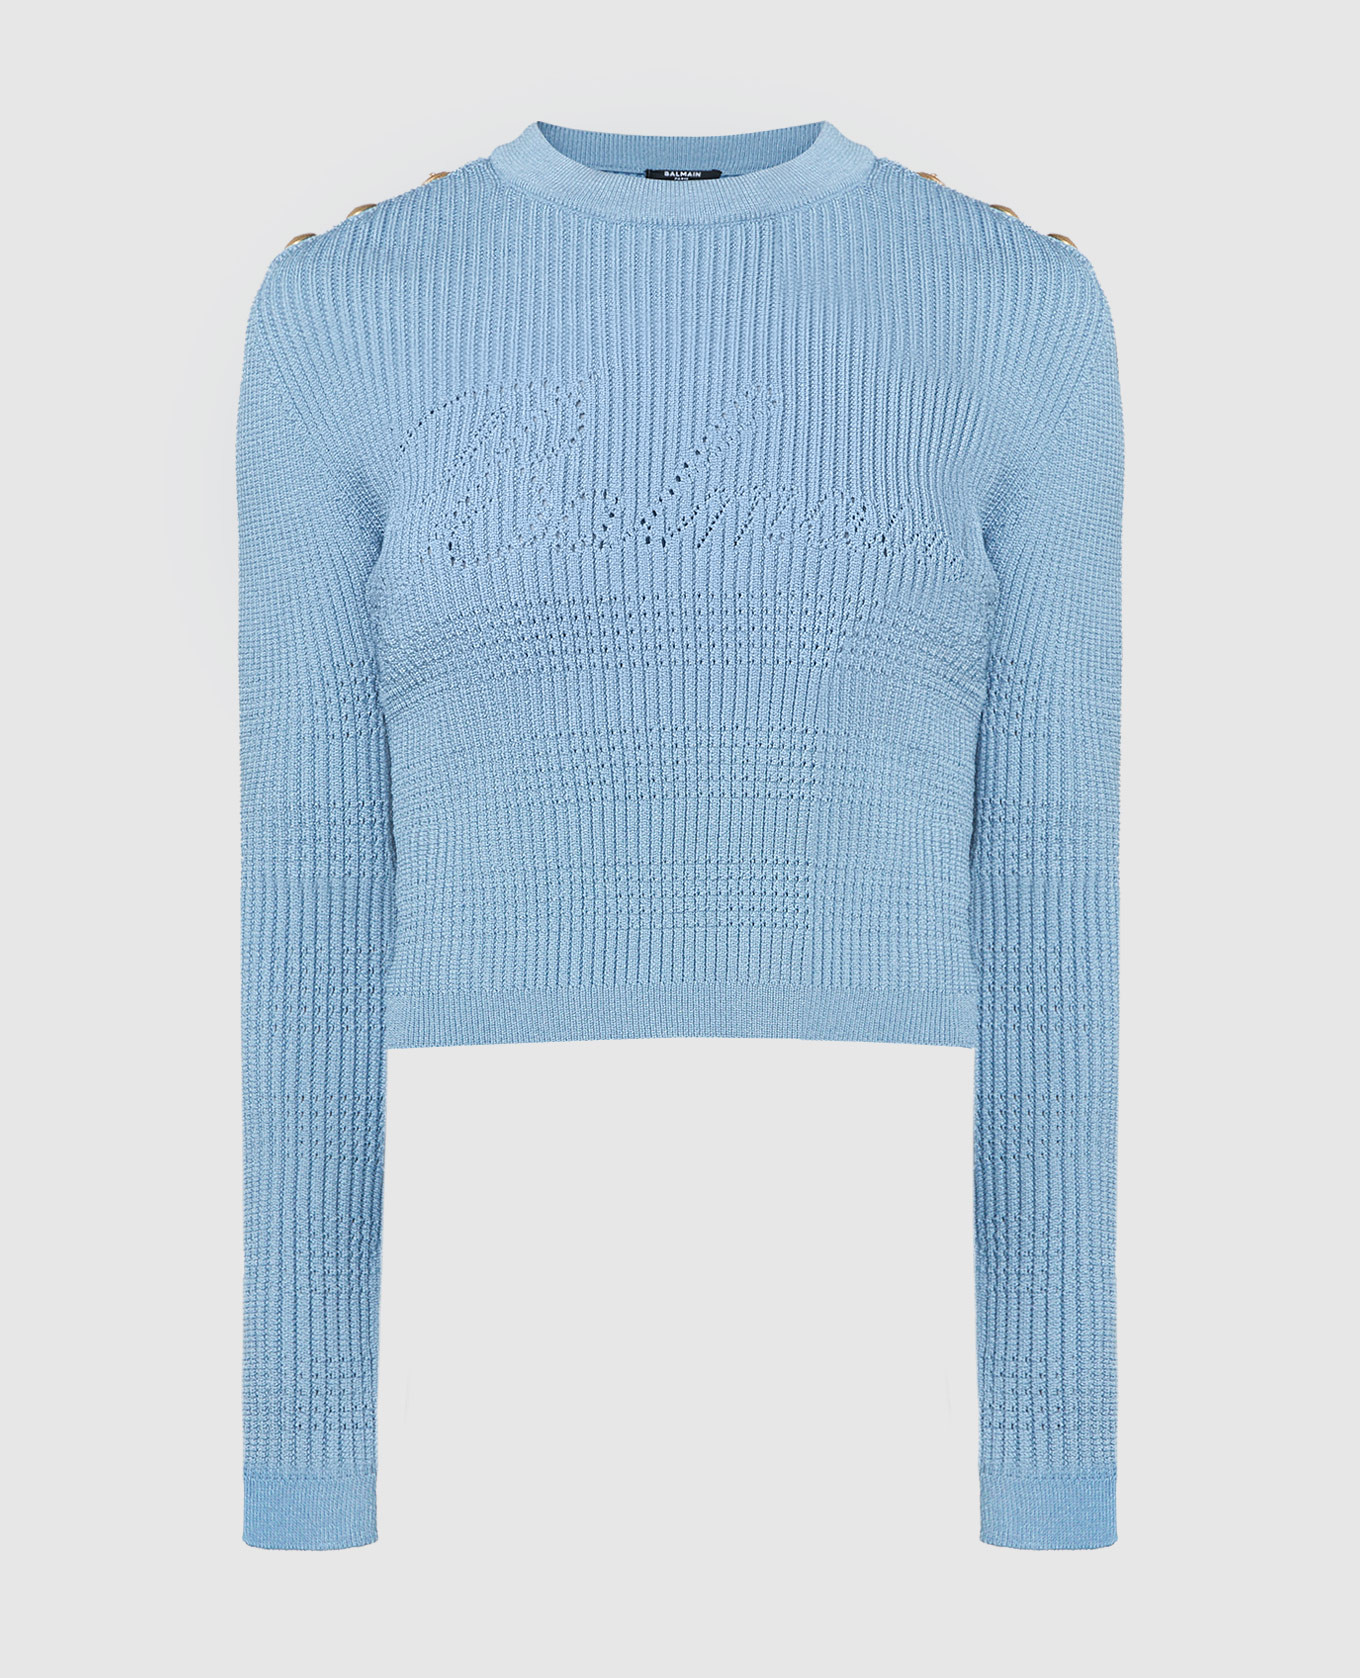 Blue jumper with branded buttons